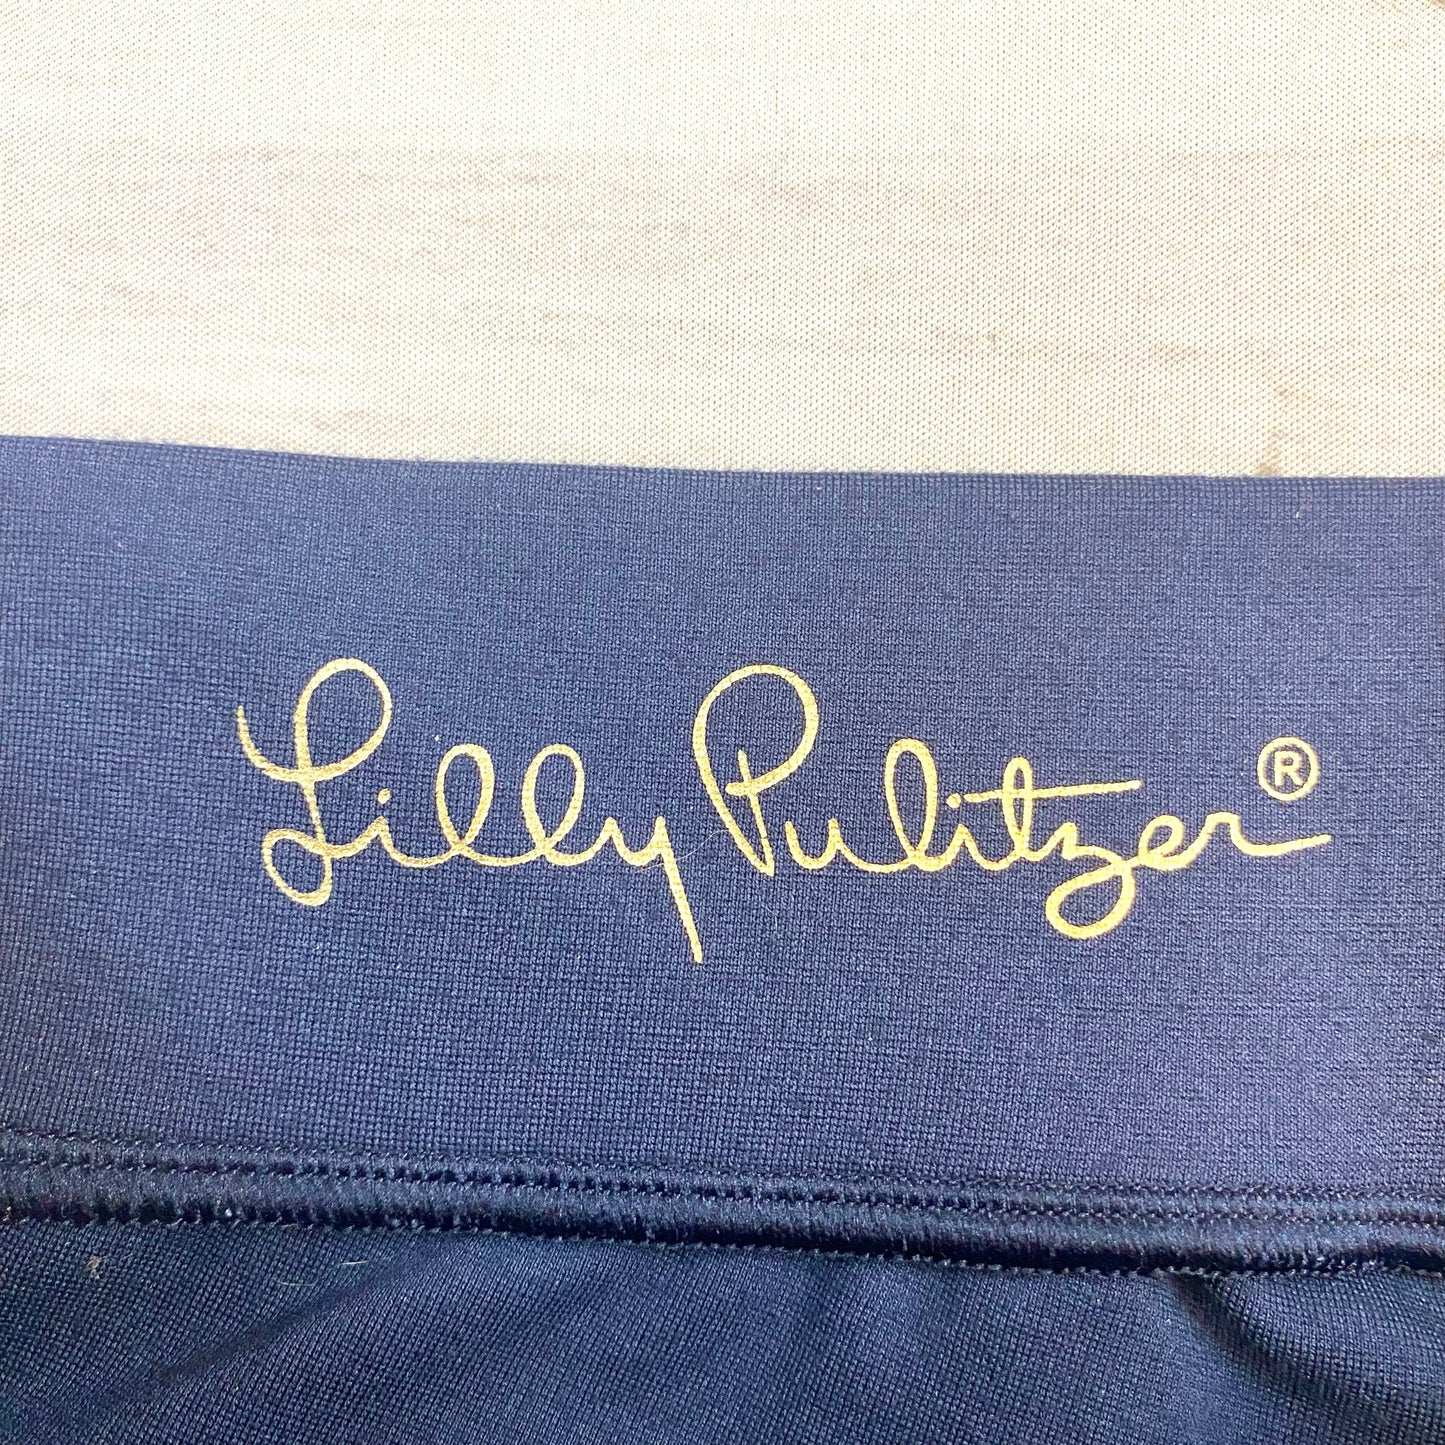 Pants Designer By Lilly Pulitzer  Size: S